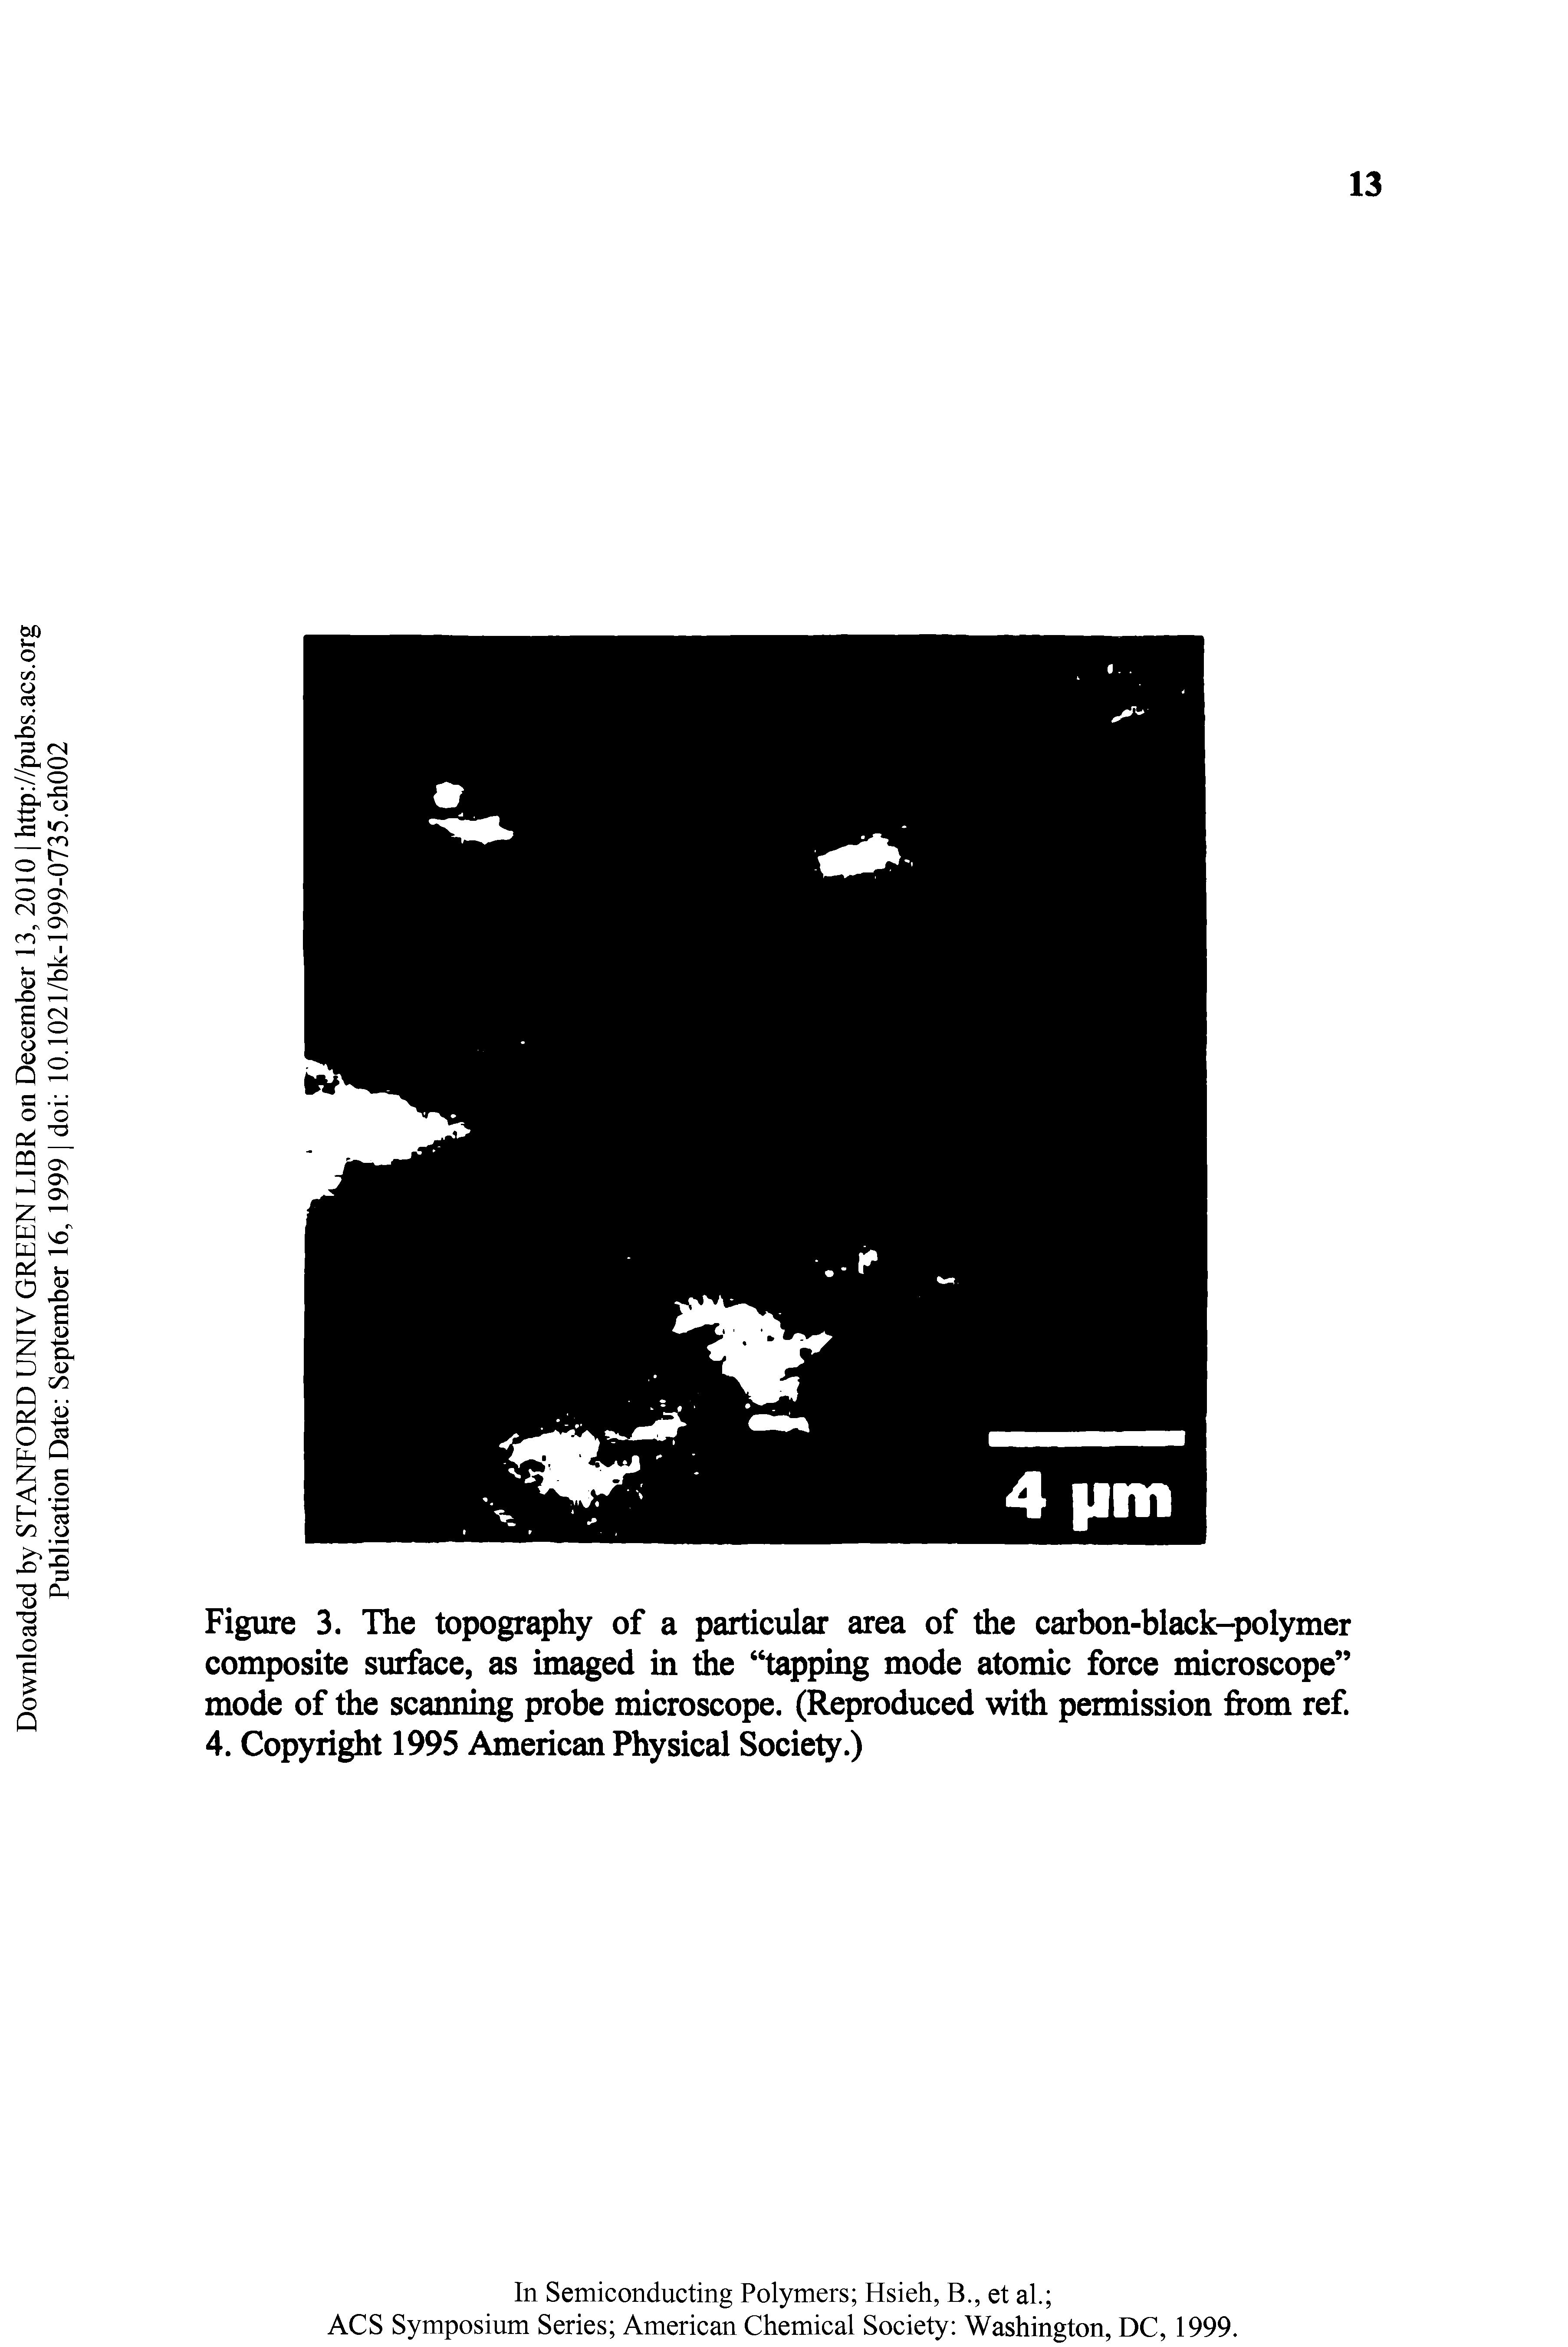 Figure 3. The topography of a particular area of the carbon-black-polymer composite surface, as imaged in Ae tapping mode atomic force microscope mode of the scanning probe microscope. (Reproduced with permission from ref 4. Copyright 1995 American Physical Society.)...